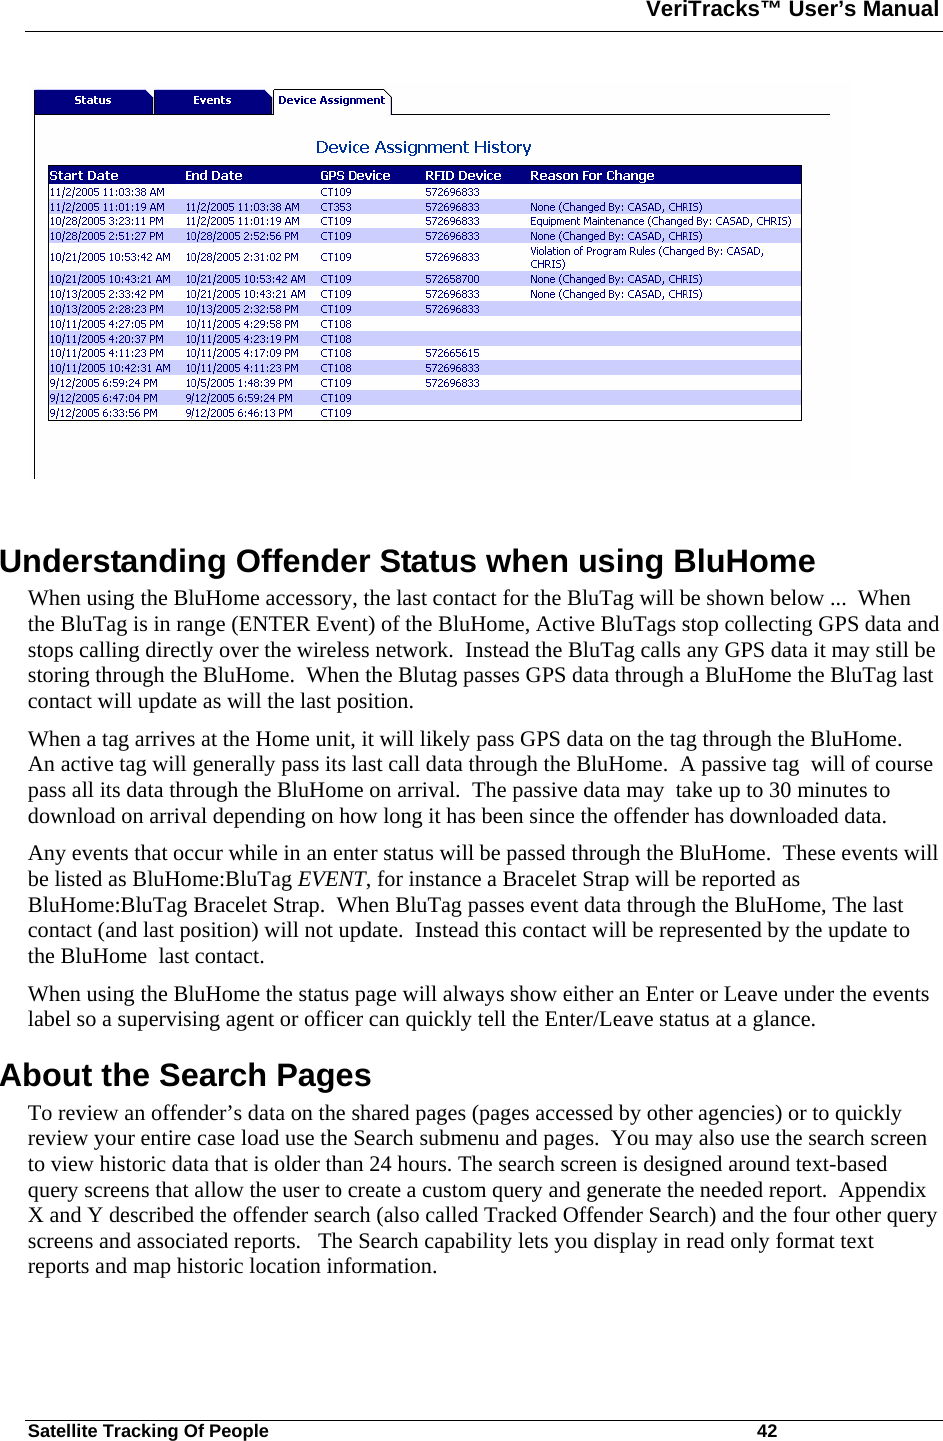 VeriTracks™ User’s Manual  Satellite Tracking Of People       42   Understanding Offender Status when using BluHome When using the BluHome accessory, the last contact for the BluTag will be shown below ...  When the BluTag is in range (ENTER Event) of the BluHome, Active BluTags stop collecting GPS data and stops calling directly over the wireless network.  Instead the BluTag calls any GPS data it may still be storing through the BluHome.  When the Blutag passes GPS data through a BluHome the BluTag last contact will update as will the last position.  When a tag arrives at the Home unit, it will likely pass GPS data on the tag through the BluHome.  An active tag will generally pass its last call data through the BluHome.  A passive tag  will of course pass all its data through the BluHome on arrival.  The passive data may  take up to 30 minutes to download on arrival depending on how long it has been since the offender has downloaded data.  Any events that occur while in an enter status will be passed through the BluHome.  These events will be listed as BluHome:BluTag EVENT, for instance a Bracelet Strap will be reported as  BluHome:BluTag Bracelet Strap.  When BluTag passes event data through the BluHome, The last contact (and last position) will not update.  Instead this contact will be represented by the update to the BluHome  last contact. When using the BluHome the status page will always show either an Enter or Leave under the events label so a supervising agent or officer can quickly tell the Enter/Leave status at a glance.  About the Search Pages  To review an offender’s data on the shared pages (pages accessed by other agencies) or to quickly review your entire case load use the Search submenu and pages.  You may also use the search screen to view historic data that is older than 24 hours. The search screen is designed around text-based query screens that allow the user to create a custom query and generate the needed report.  Appendix X and Y described the offender search (also called Tracked Offender Search) and the four other query screens and associated reports.   The Search capability lets you display in read only format text reports and map historic location information. 